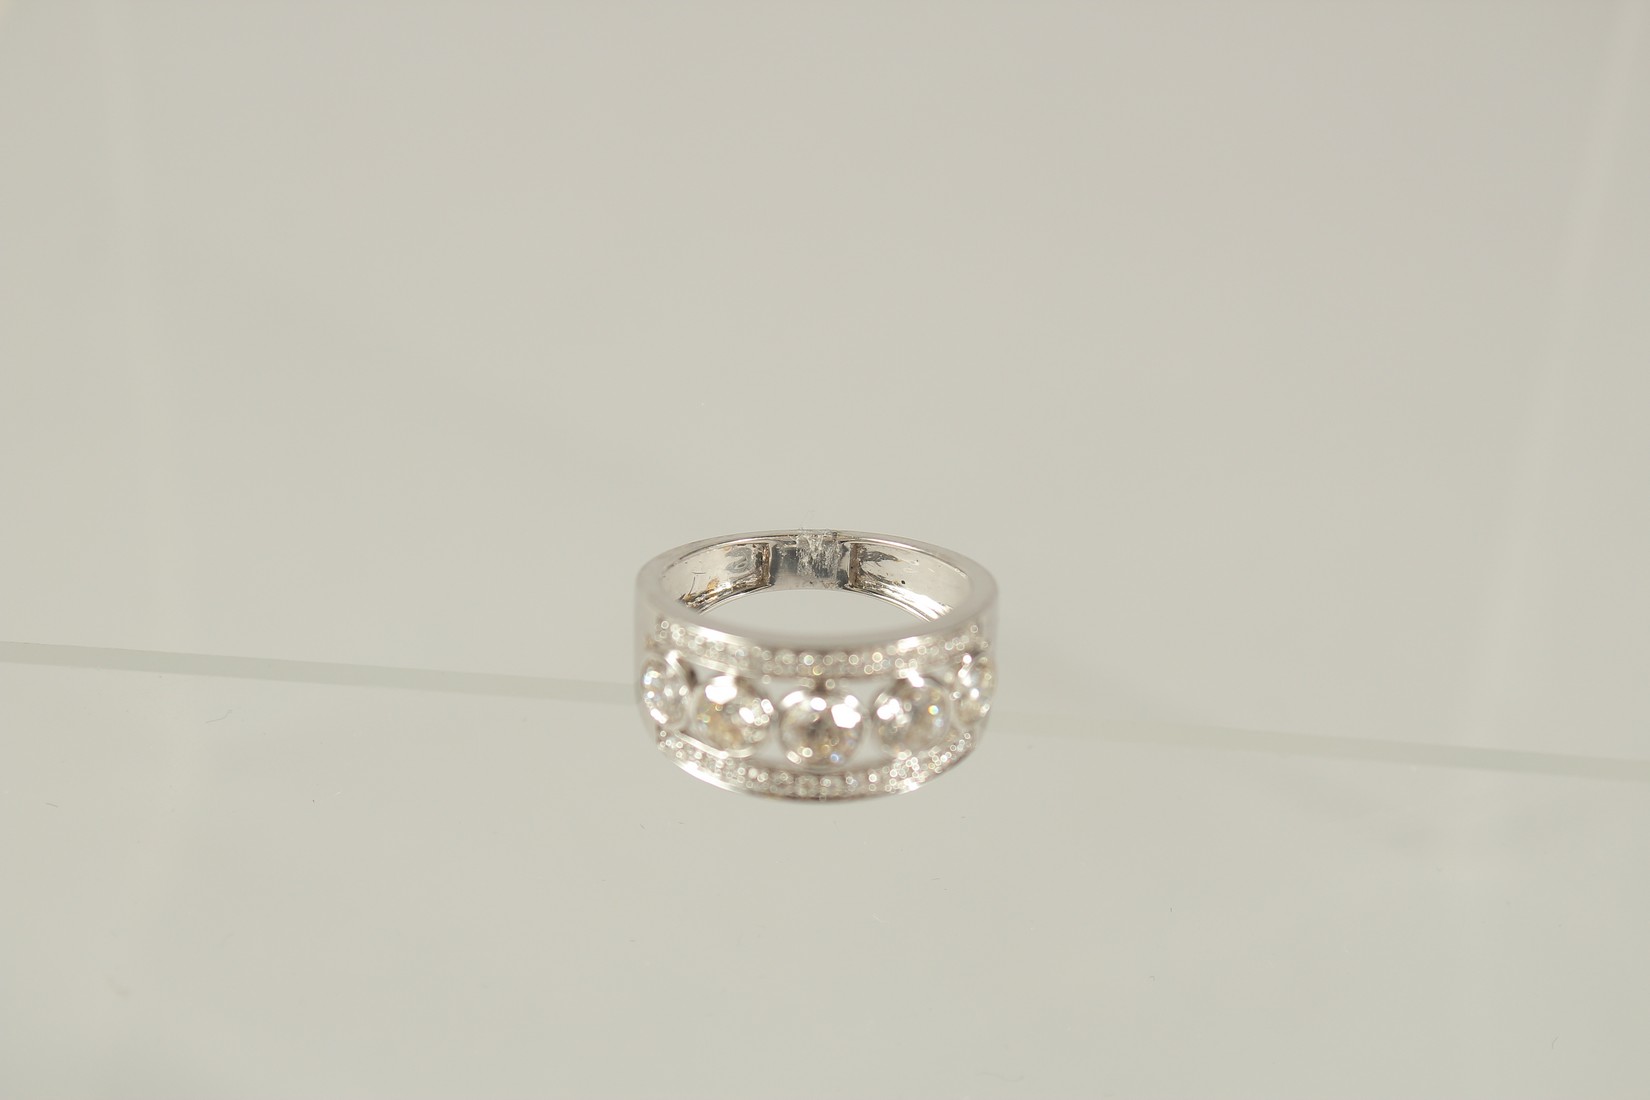 AN 18CT WHITE GOLD FIVE STONE DIAMOND RING with diamond band. - Image 3 of 3